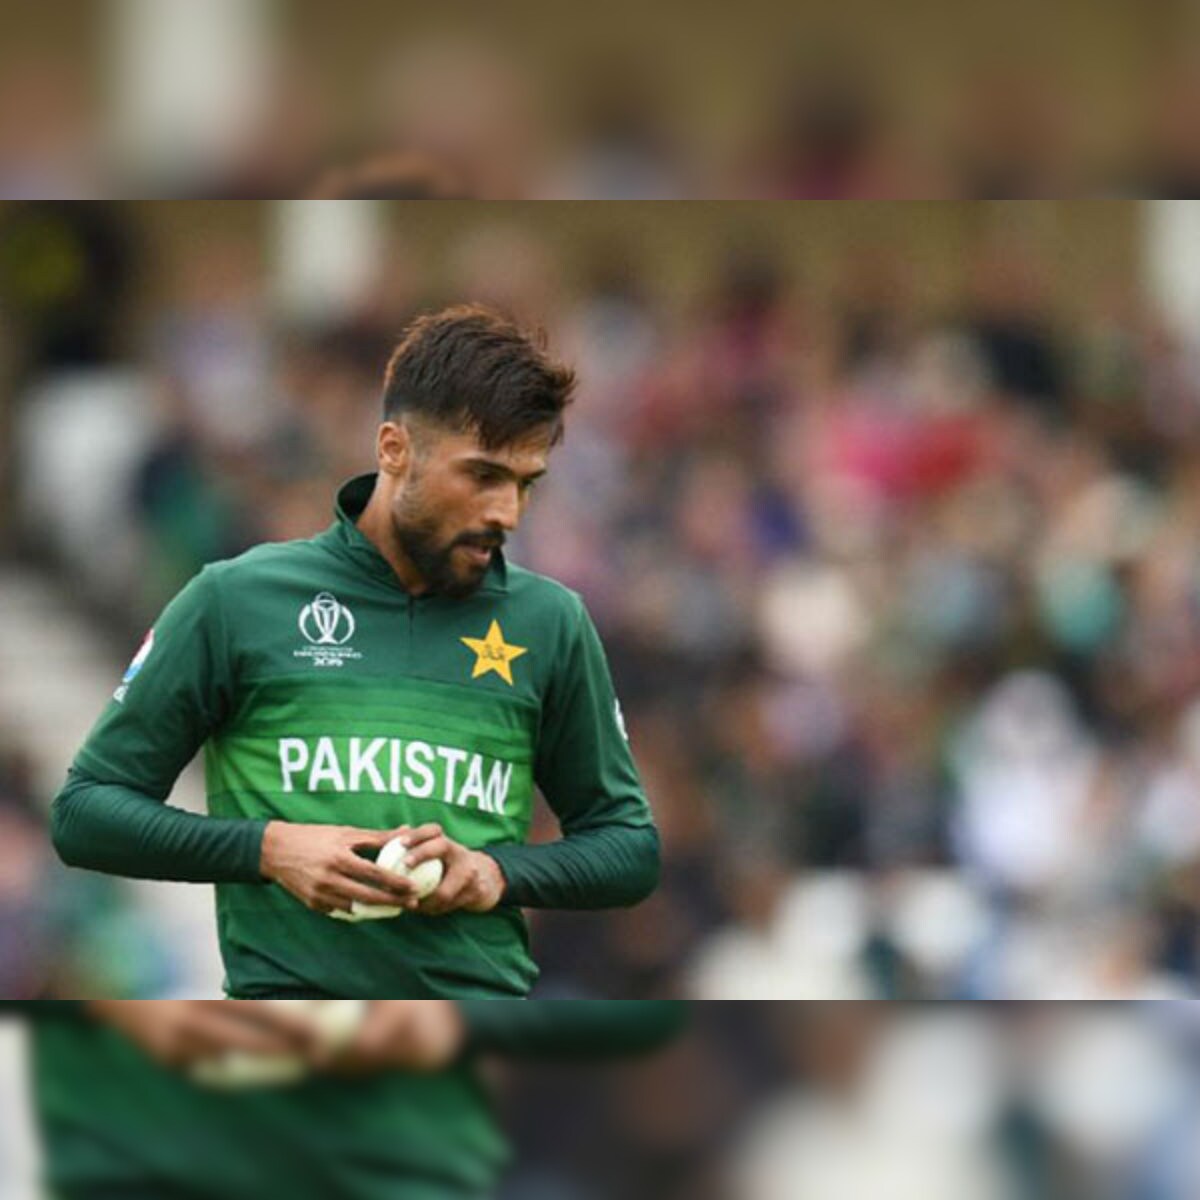 Pakistan Pacer Mohammad Amir to Play for London Spirit in The Hundred